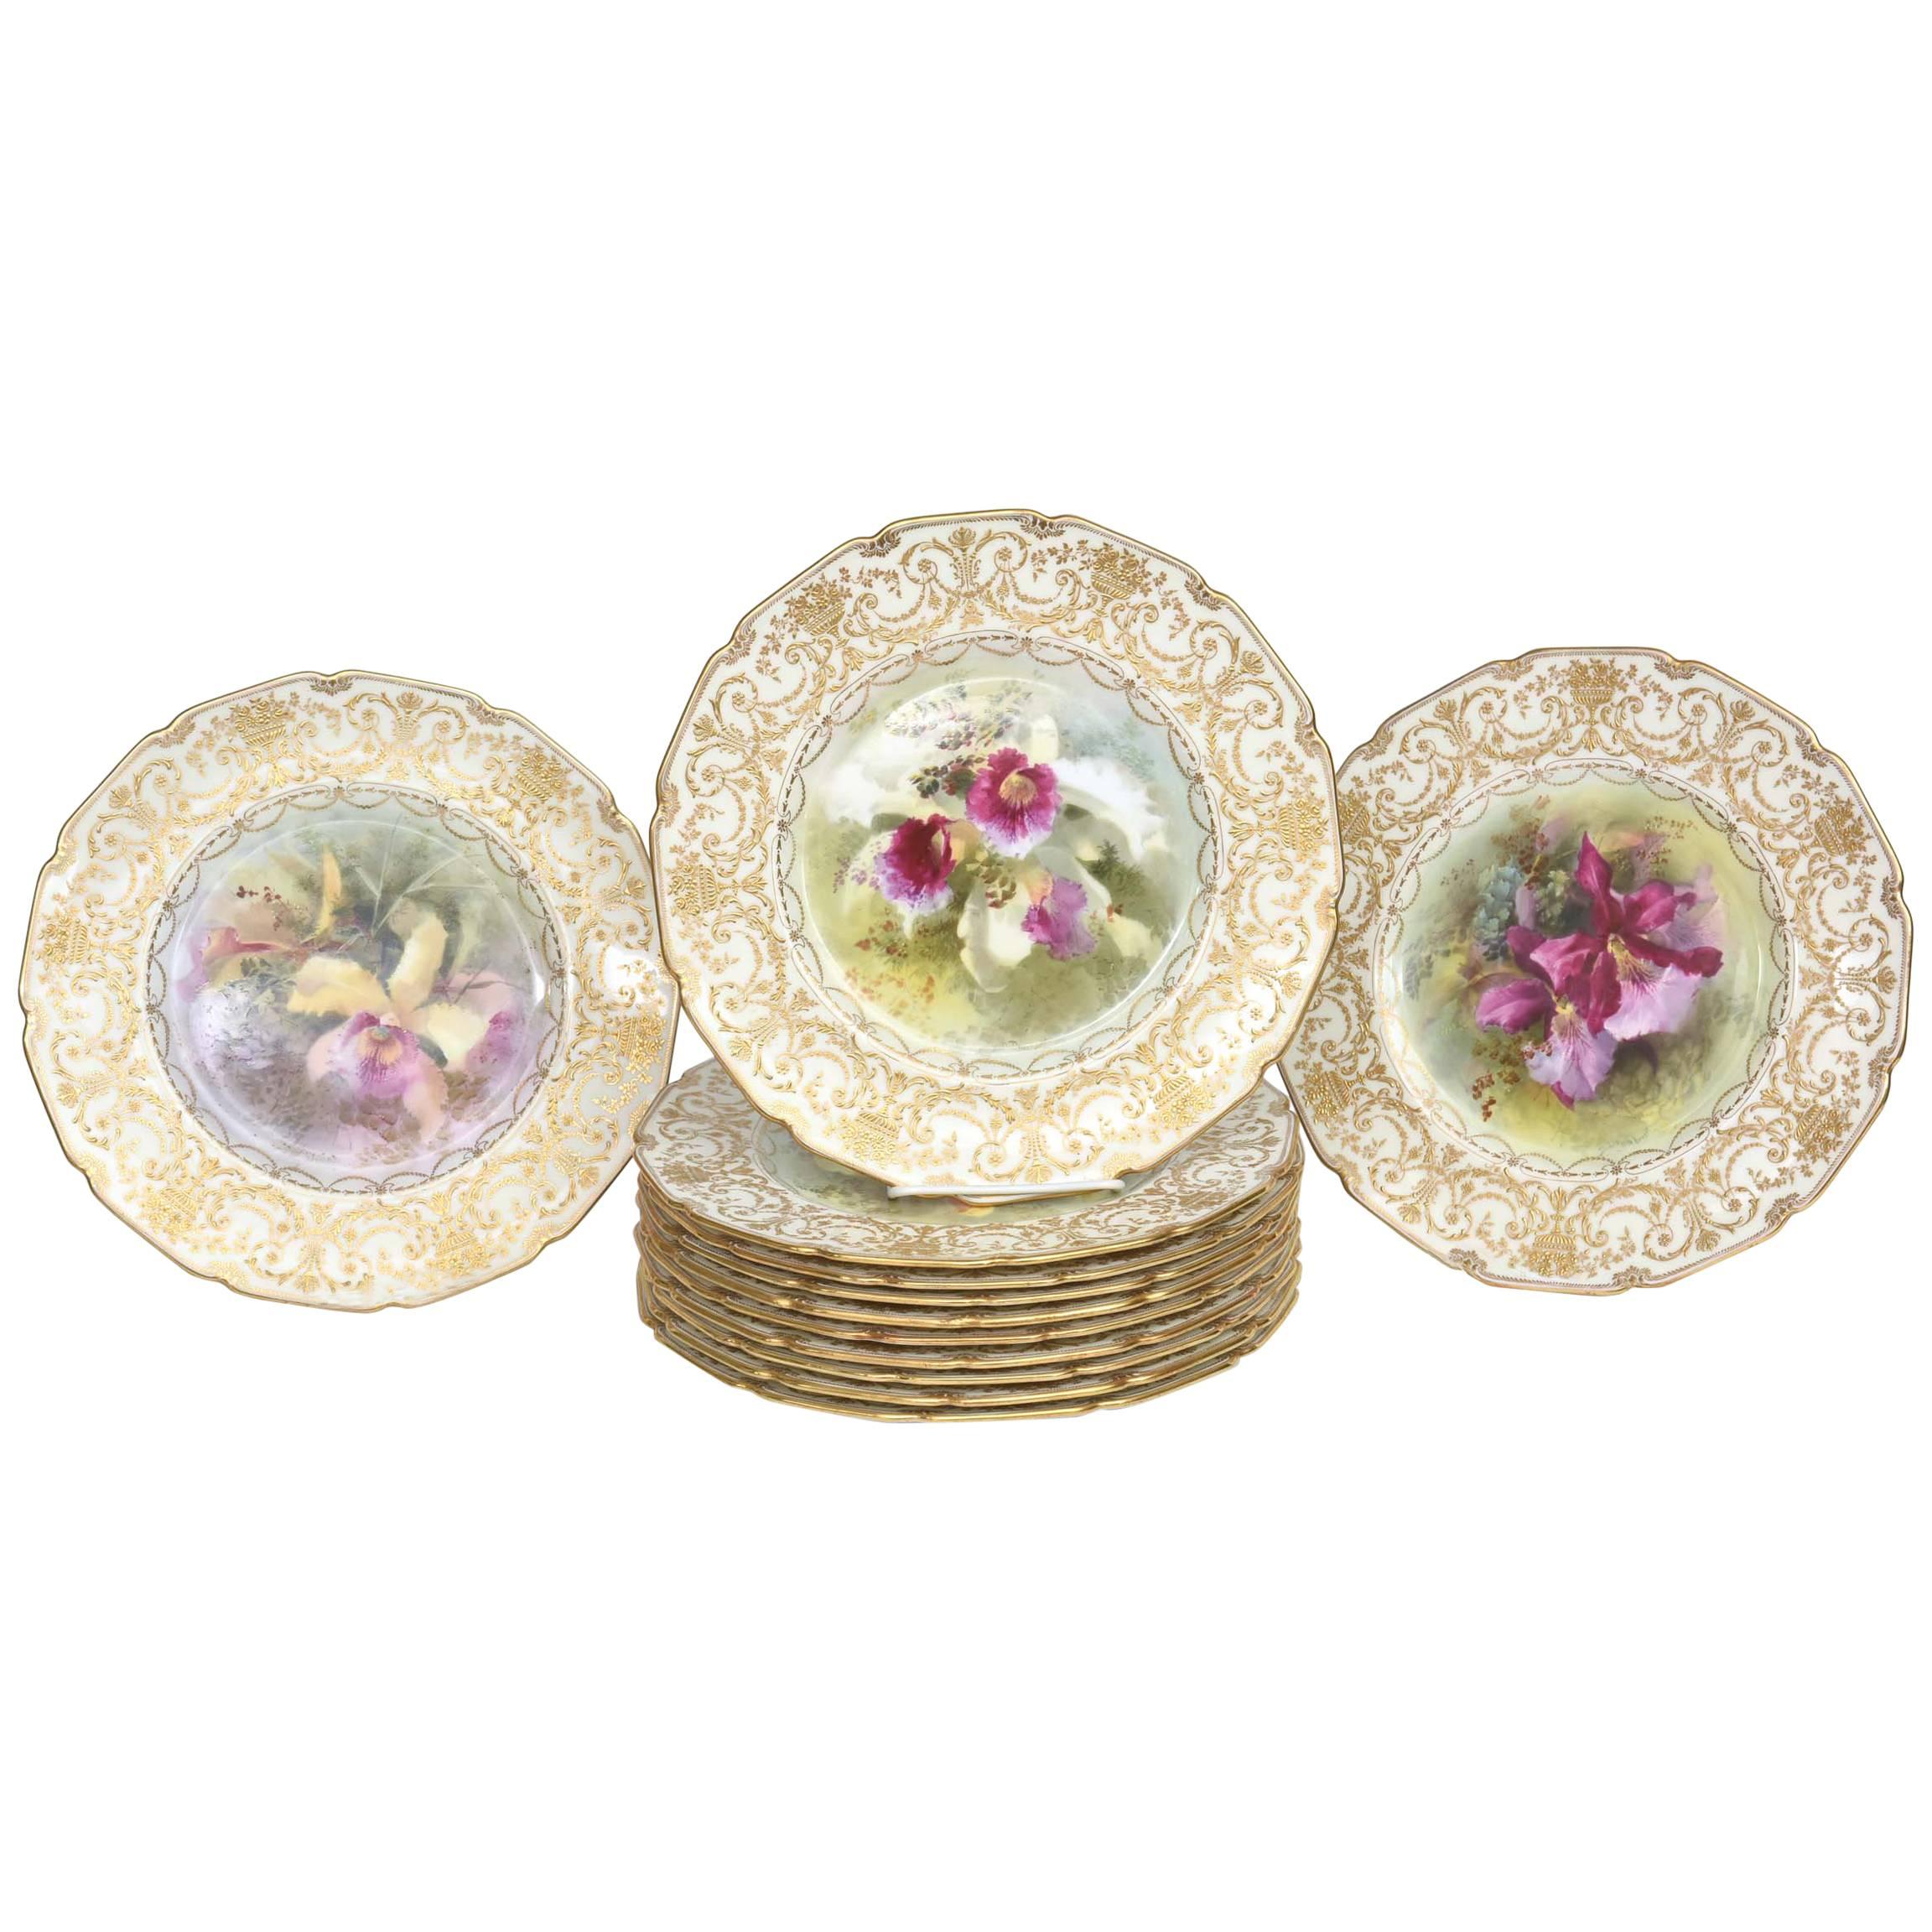 Magnificent Set of 12 Orchid Presentation Plates, Ornate and Elaborately Gilded